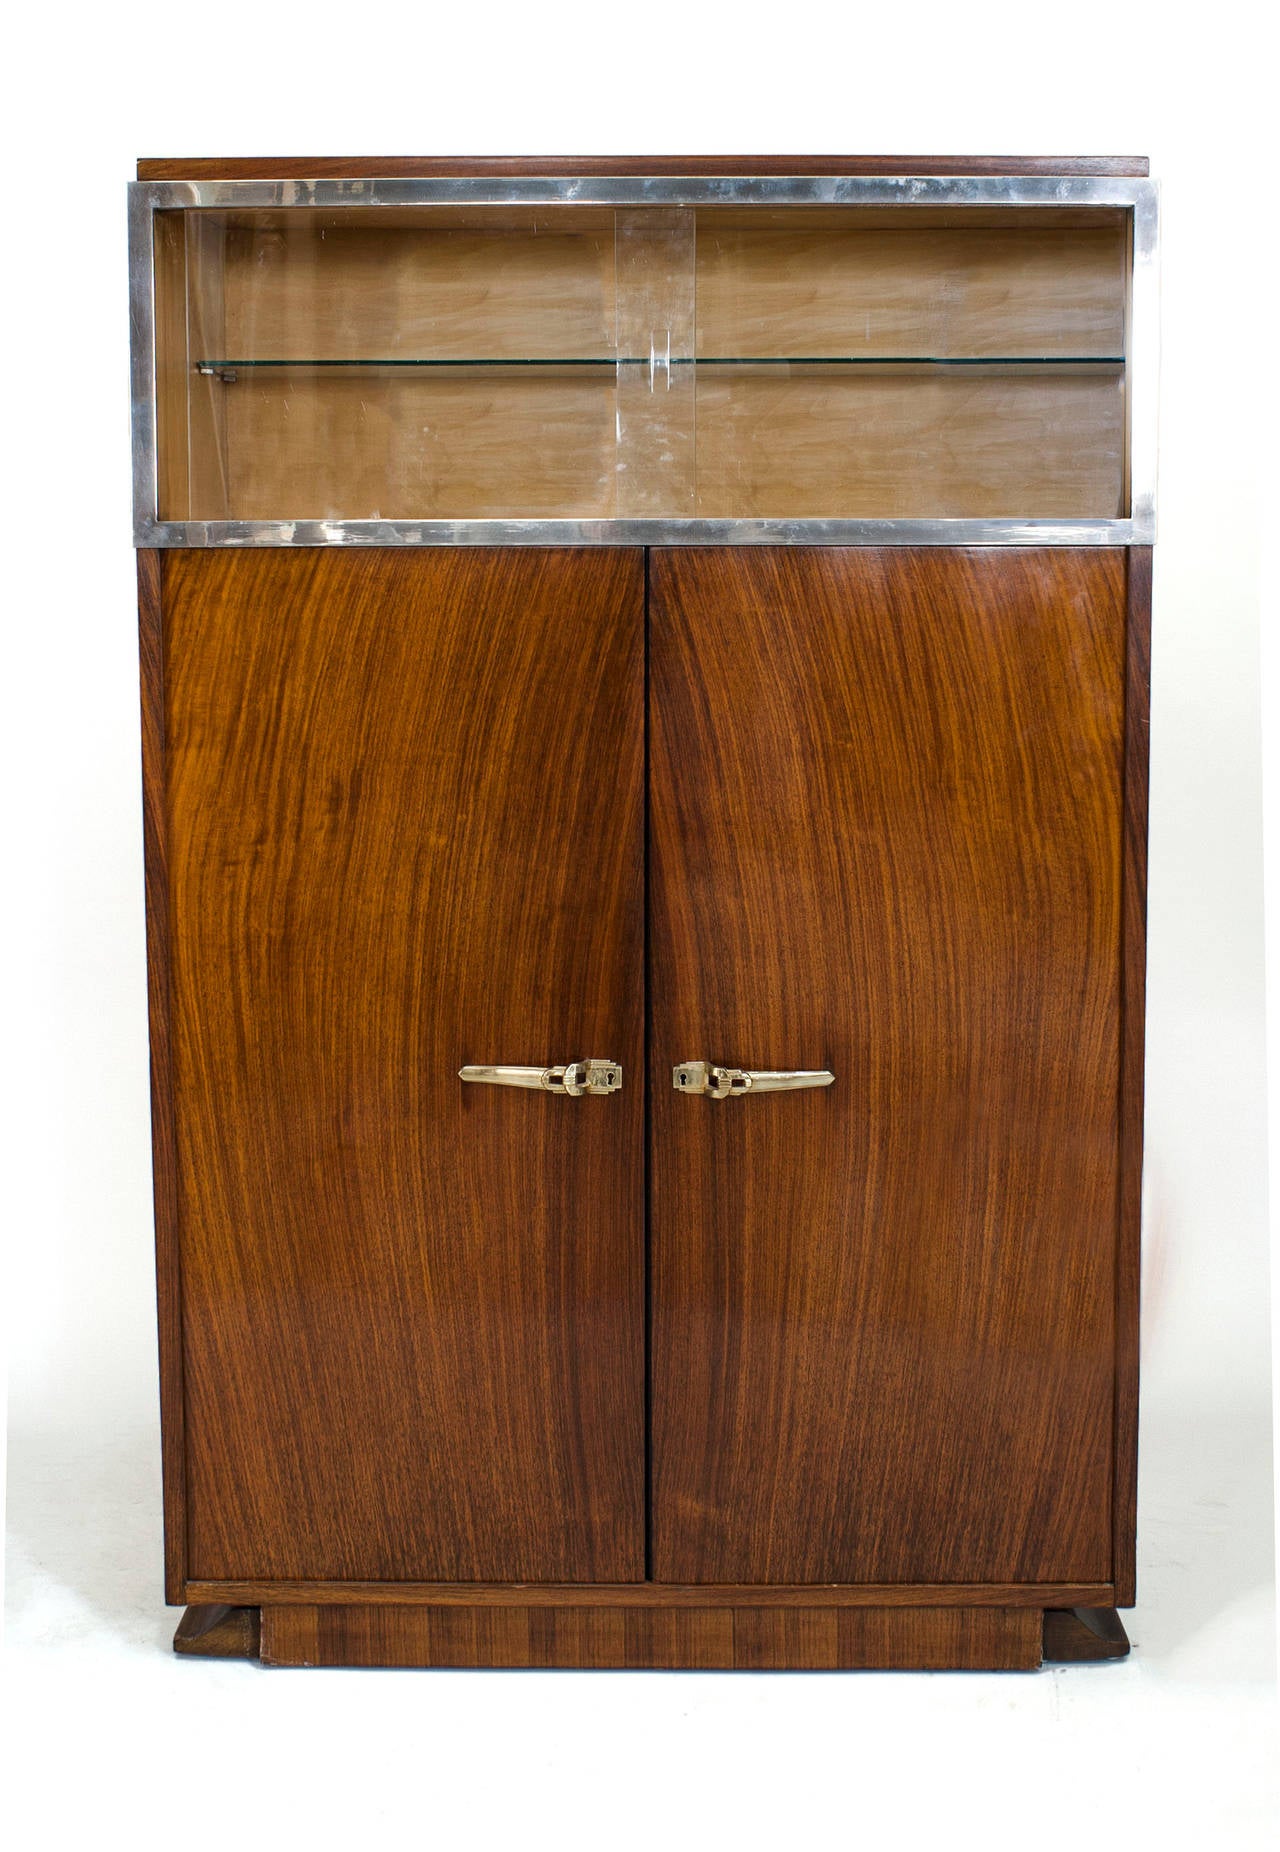 French Art Deco rosewood vitrine/bar cabinet with to glass top sliding doors framed in chrome above to large doors with brass decorative handles (branded: DOMINIQUE, PARIS)
